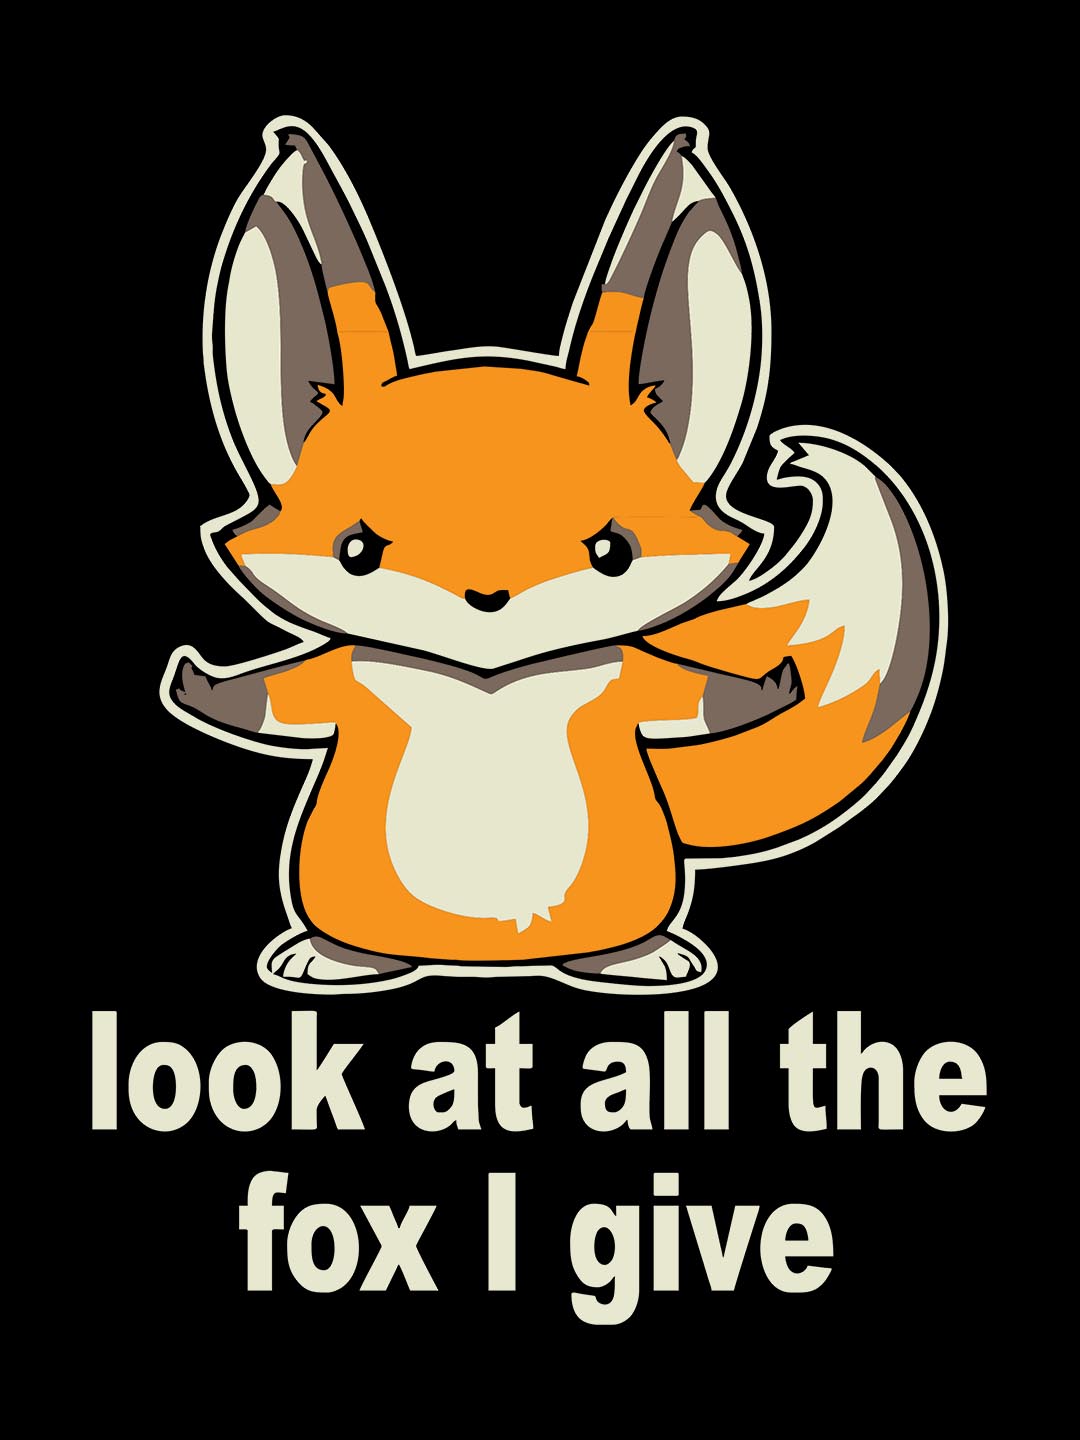 Look At All The Fox I Give Black T-Shirt